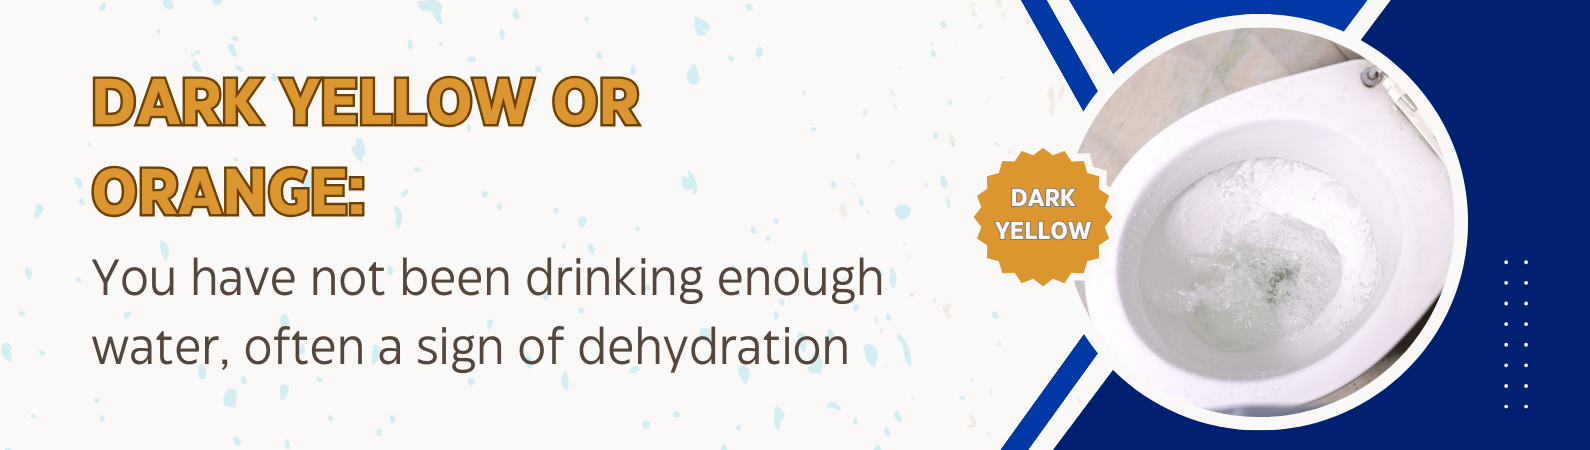 Dark yellow and orange: you have not been drinking enough water, often a sign of dehydration